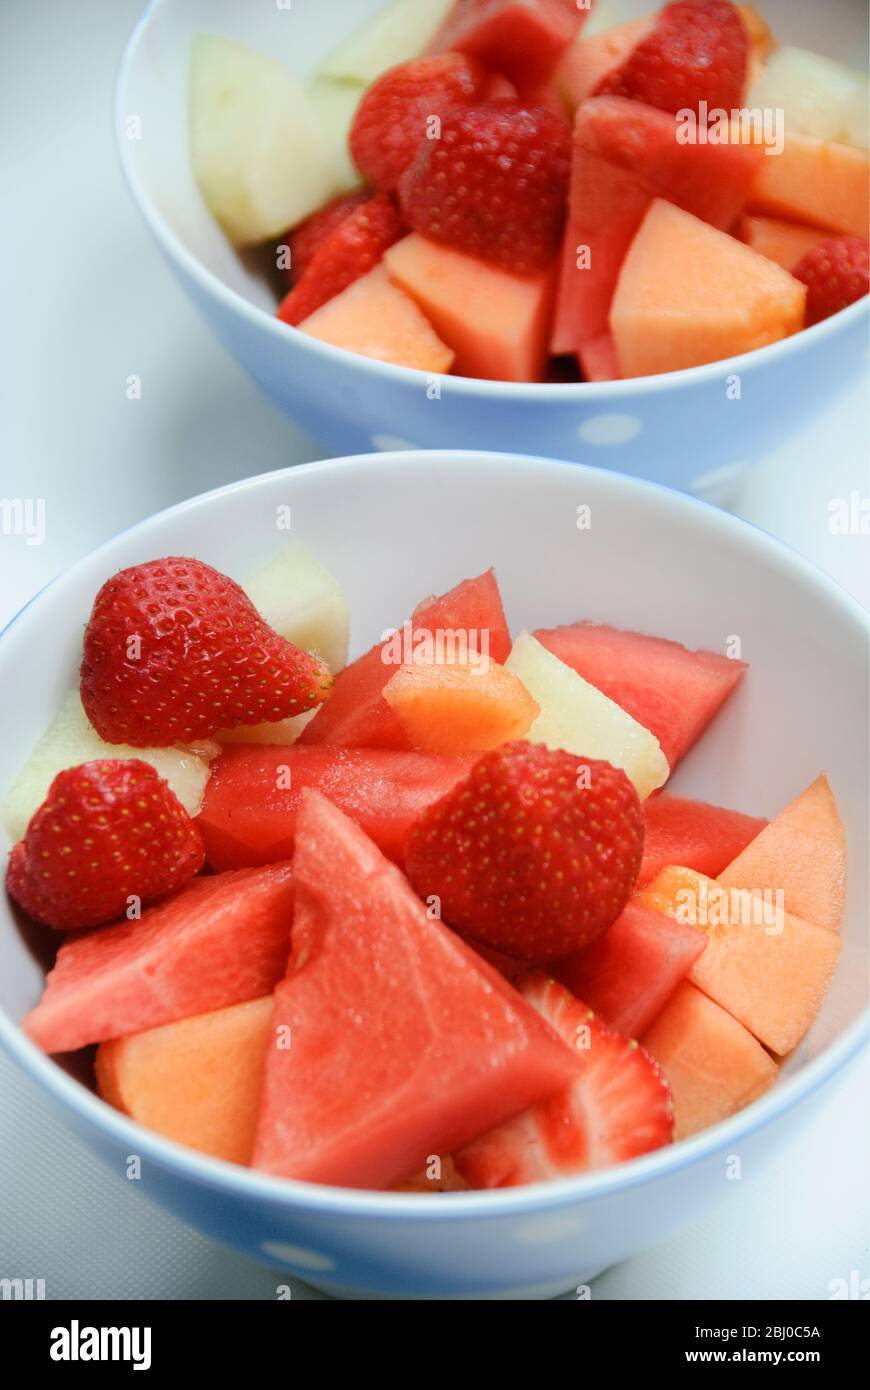 Fresh fruit salad of pieces of various sorts of melon with strawberries - Stock Photo